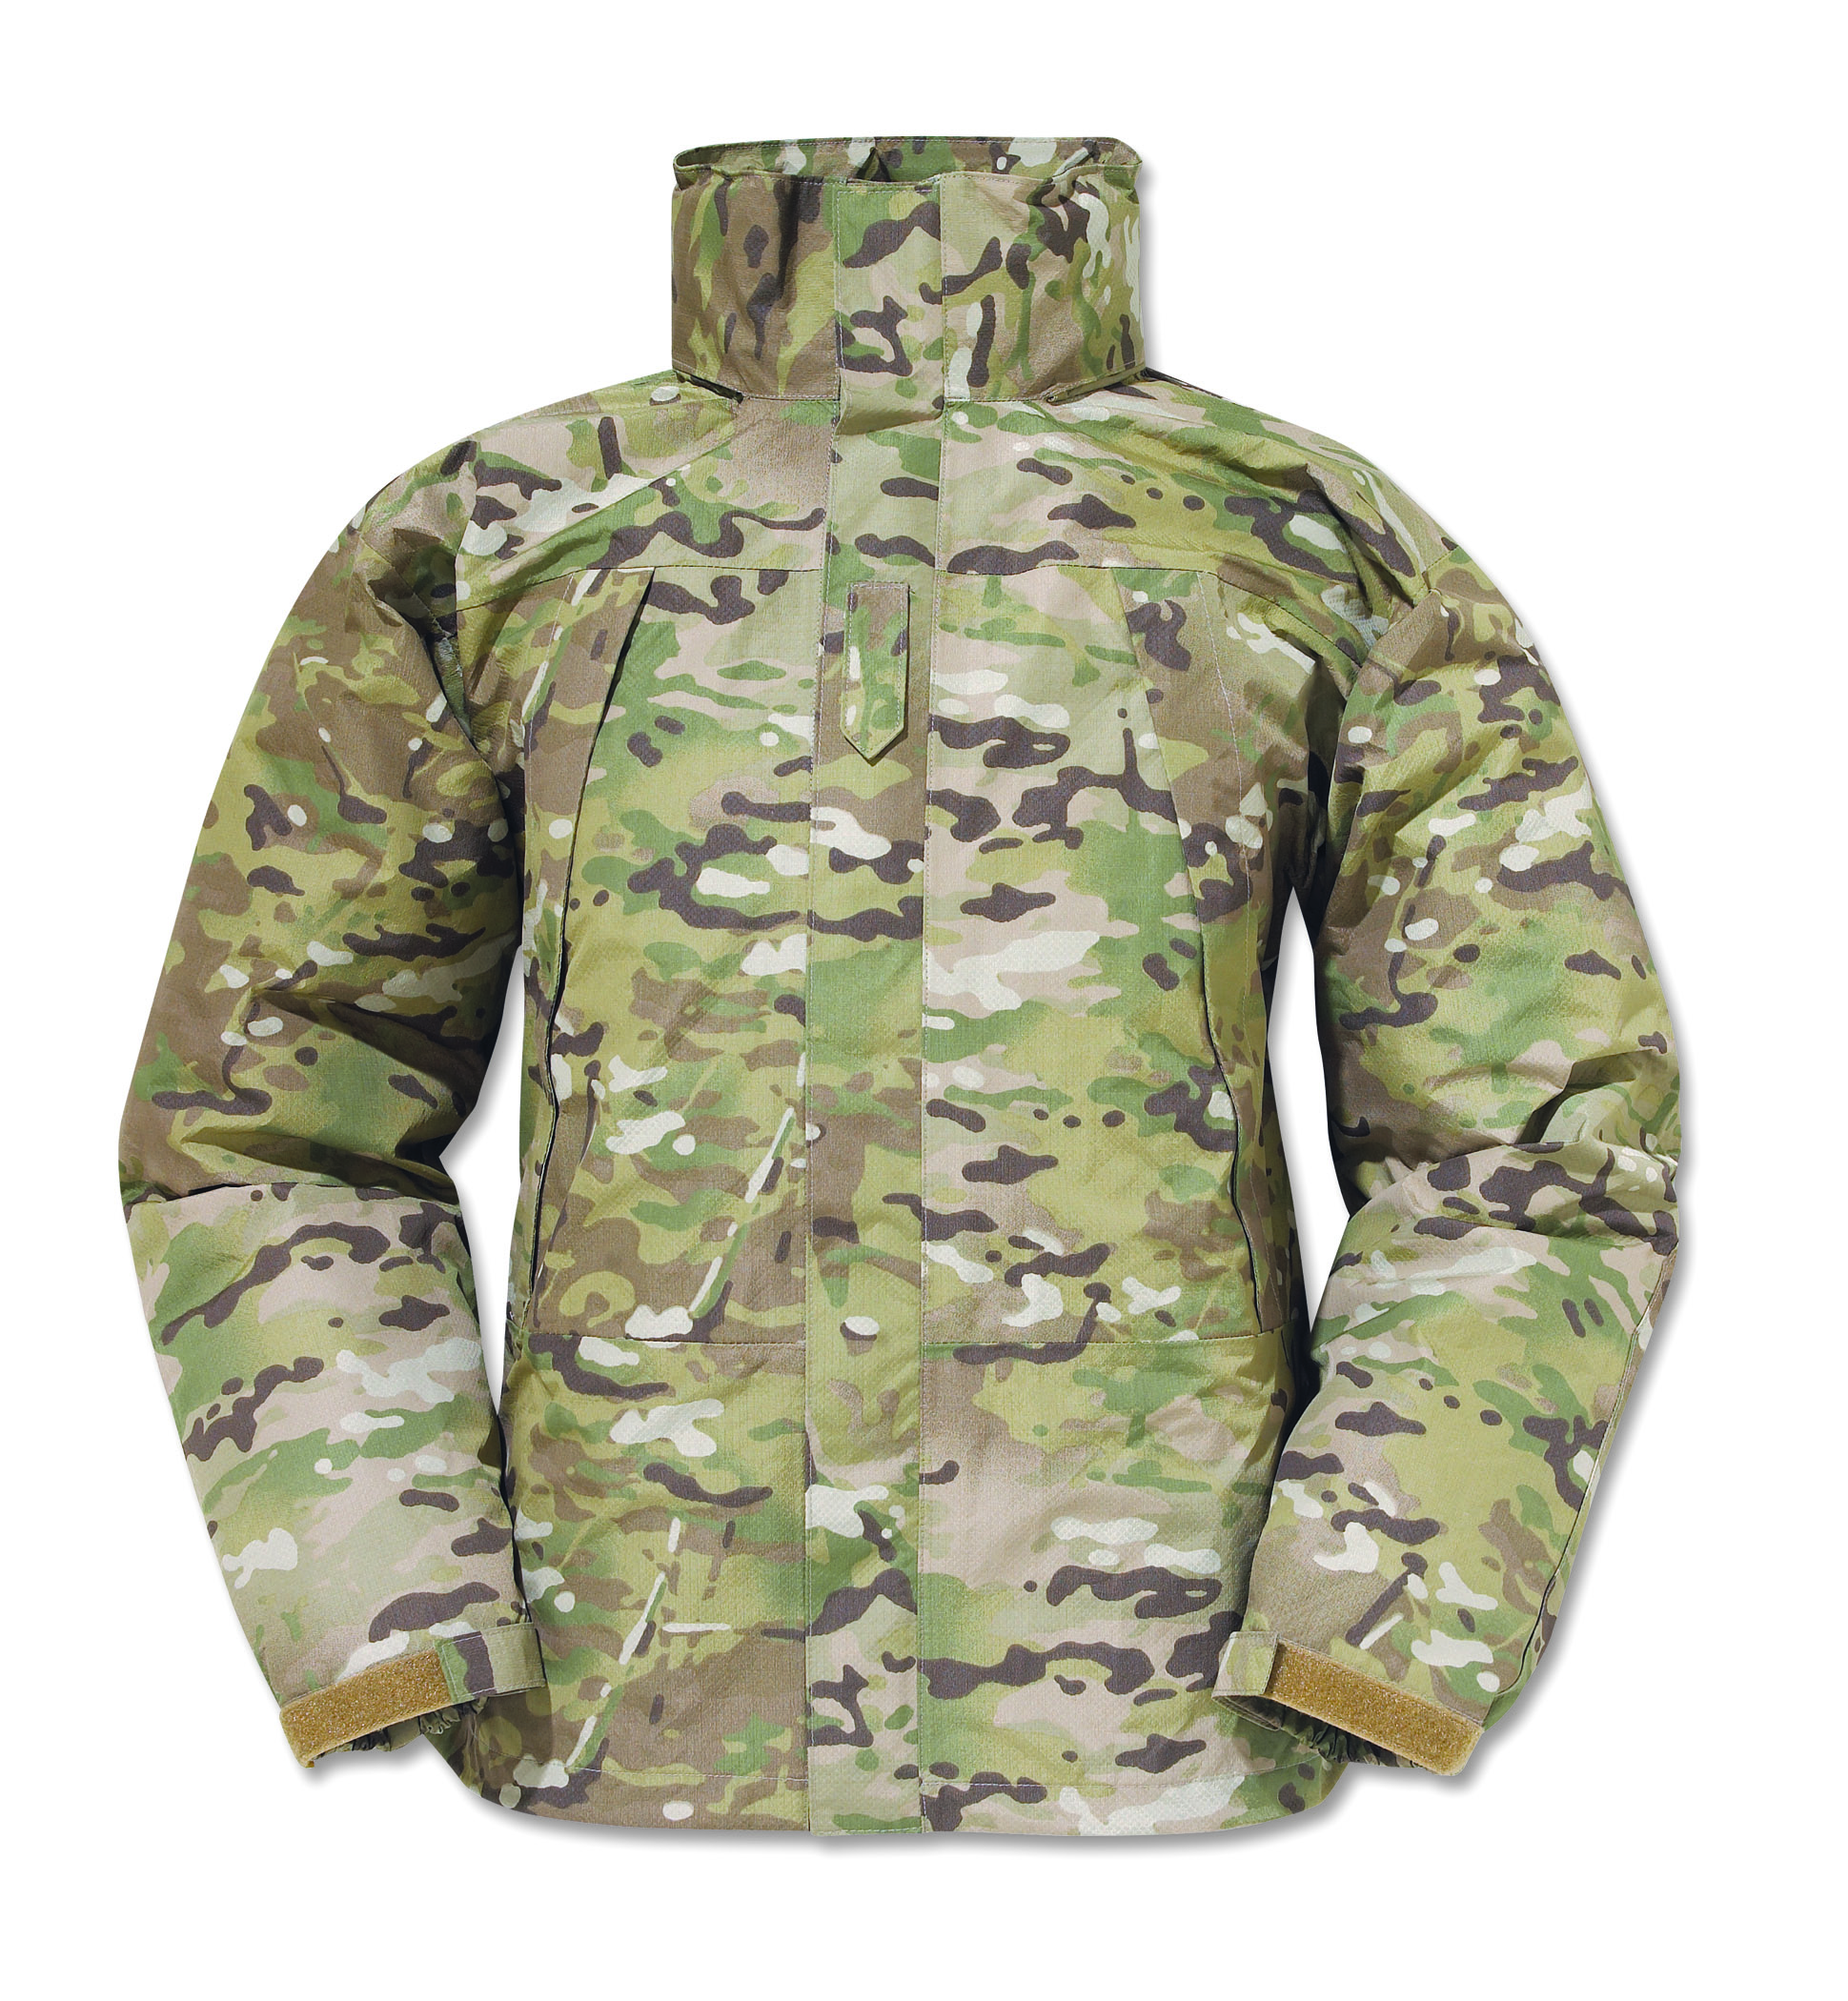 AUSA – WL Gore Expands Flame Retardant Offerings - Soldier Systems Daily